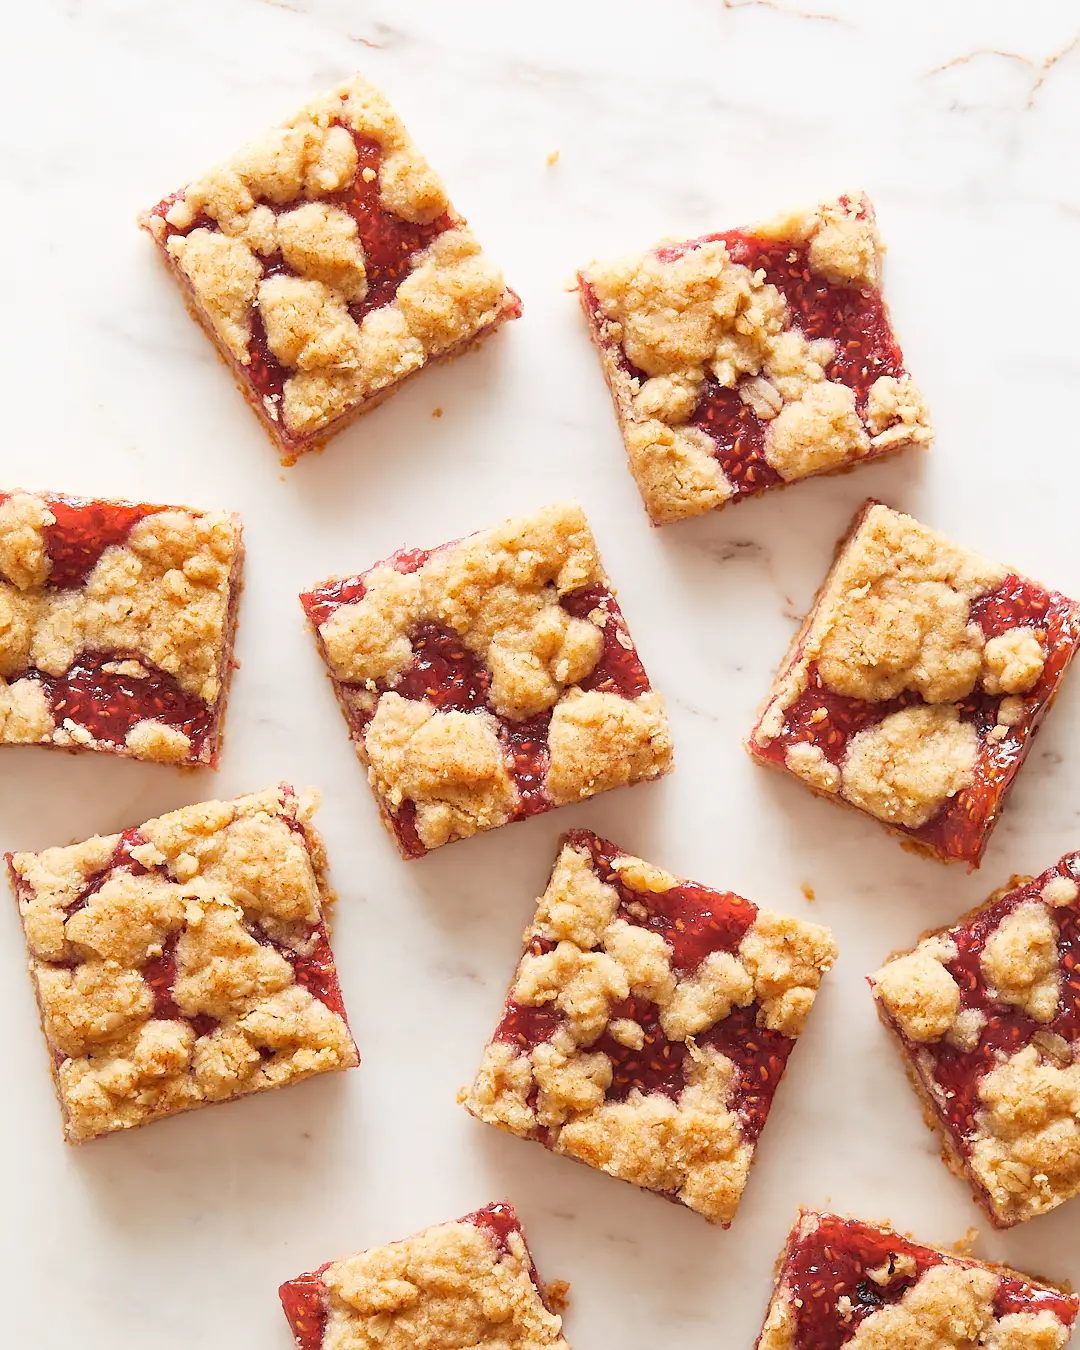 Slices of raspberry oat bars arranged on parchment paper